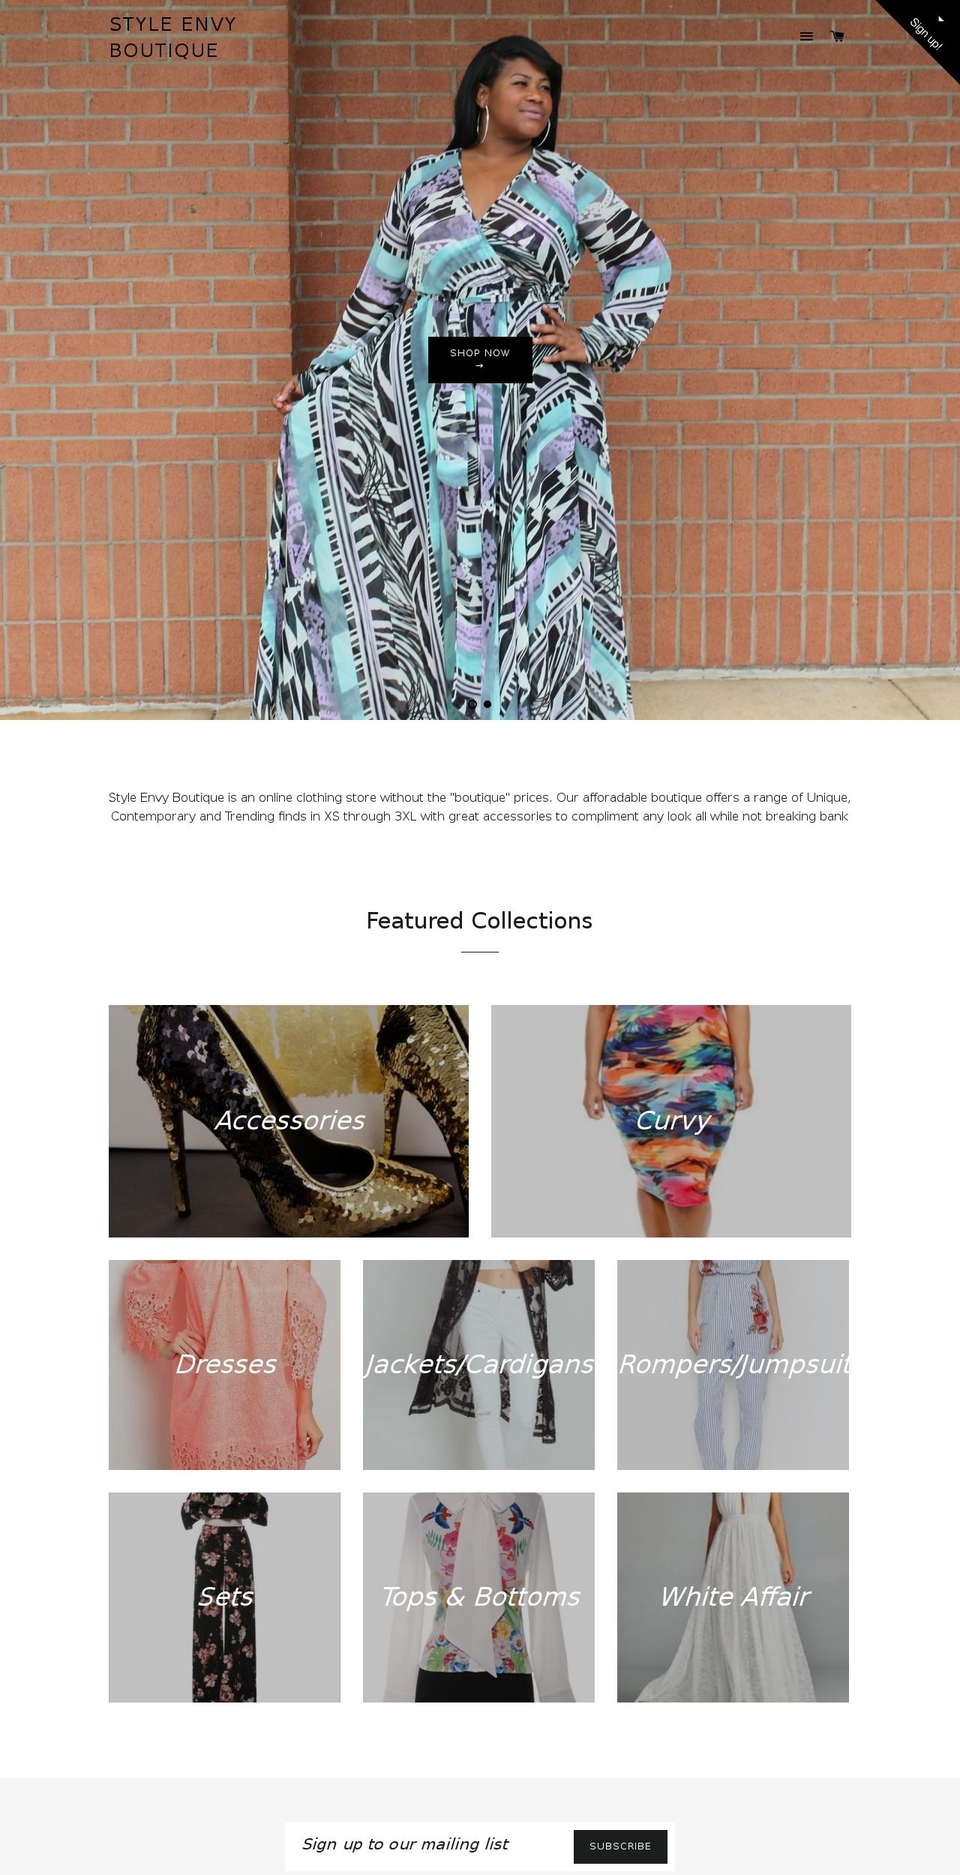 Supply Shopify theme site example style-envy-boutique.myshopify.com